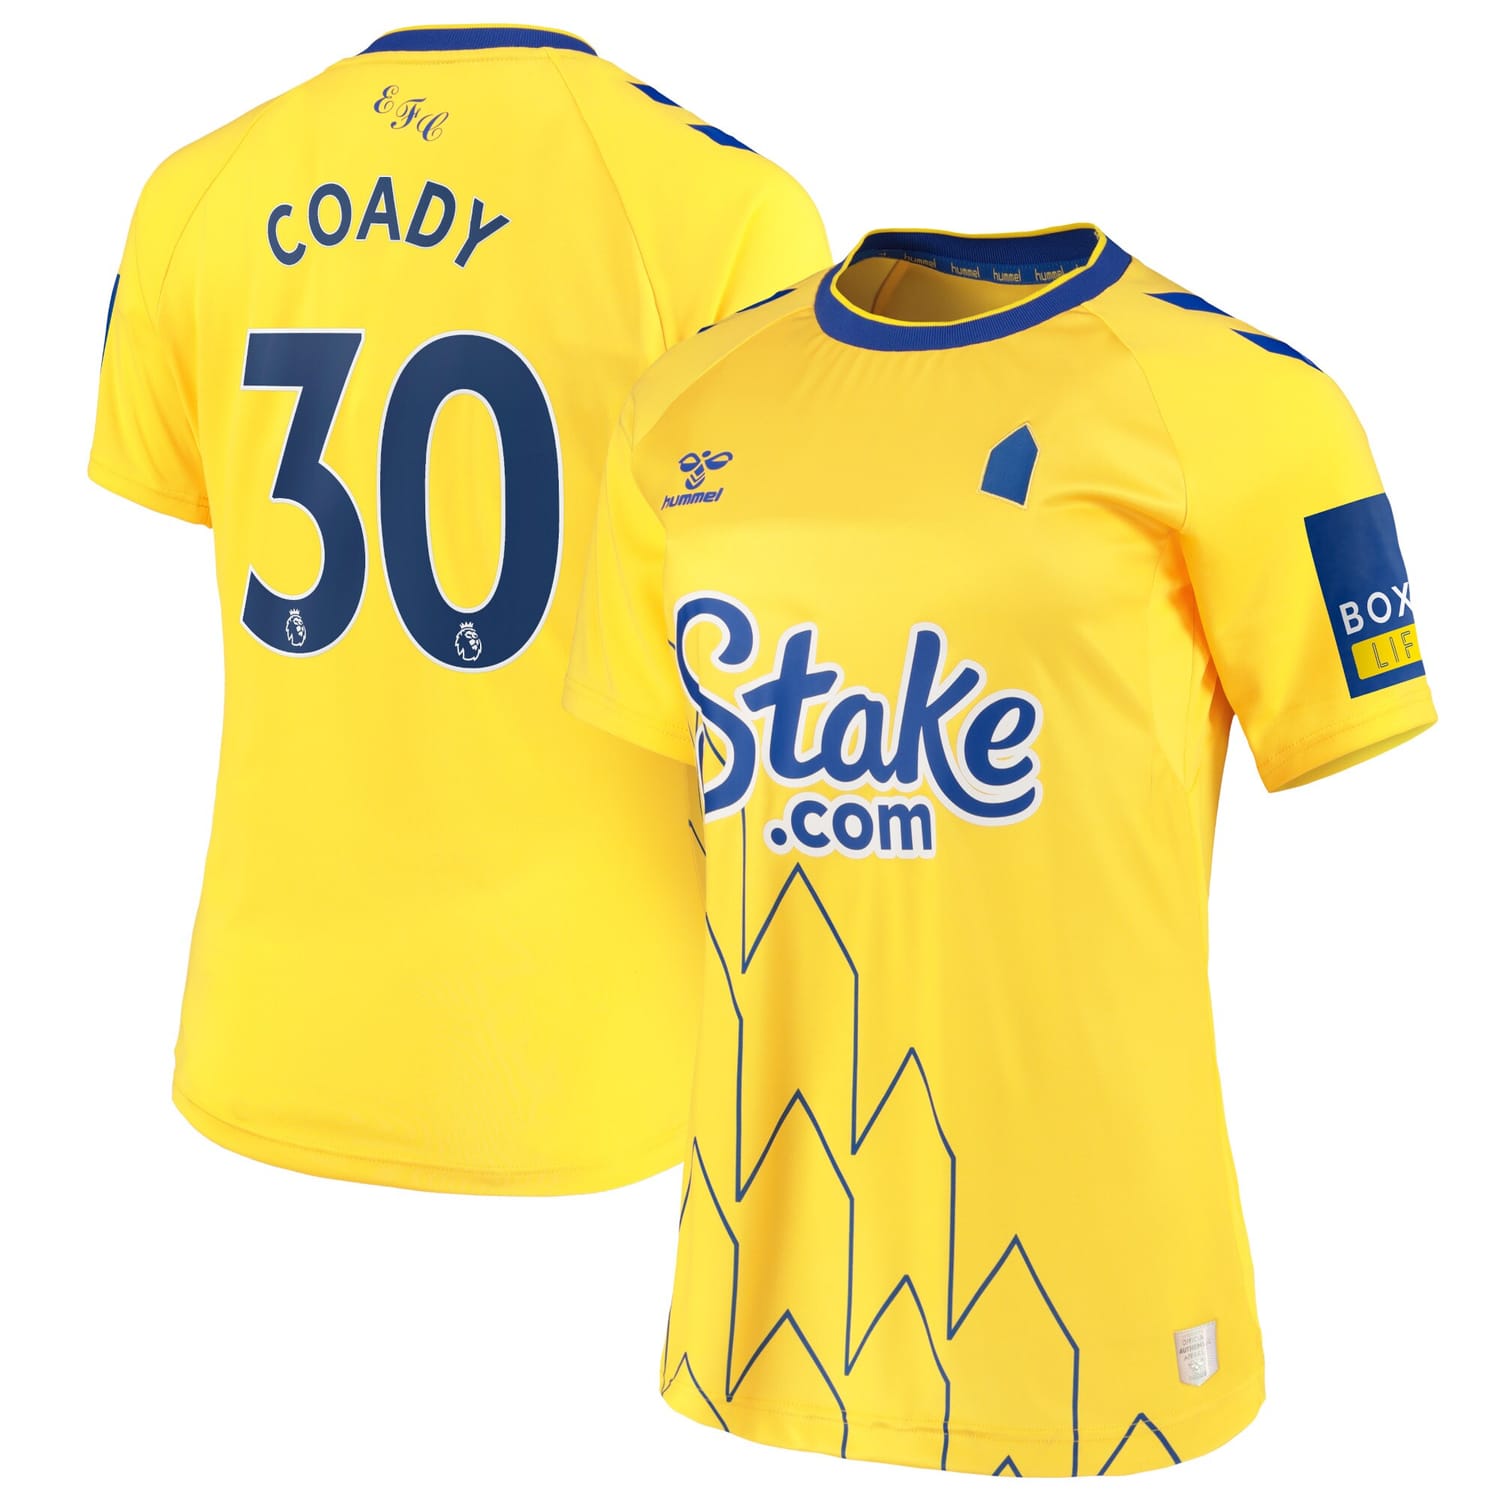 Premier League Everton Third Jersey Shirt 2022-23 player Conor Coady 30 printing for Women